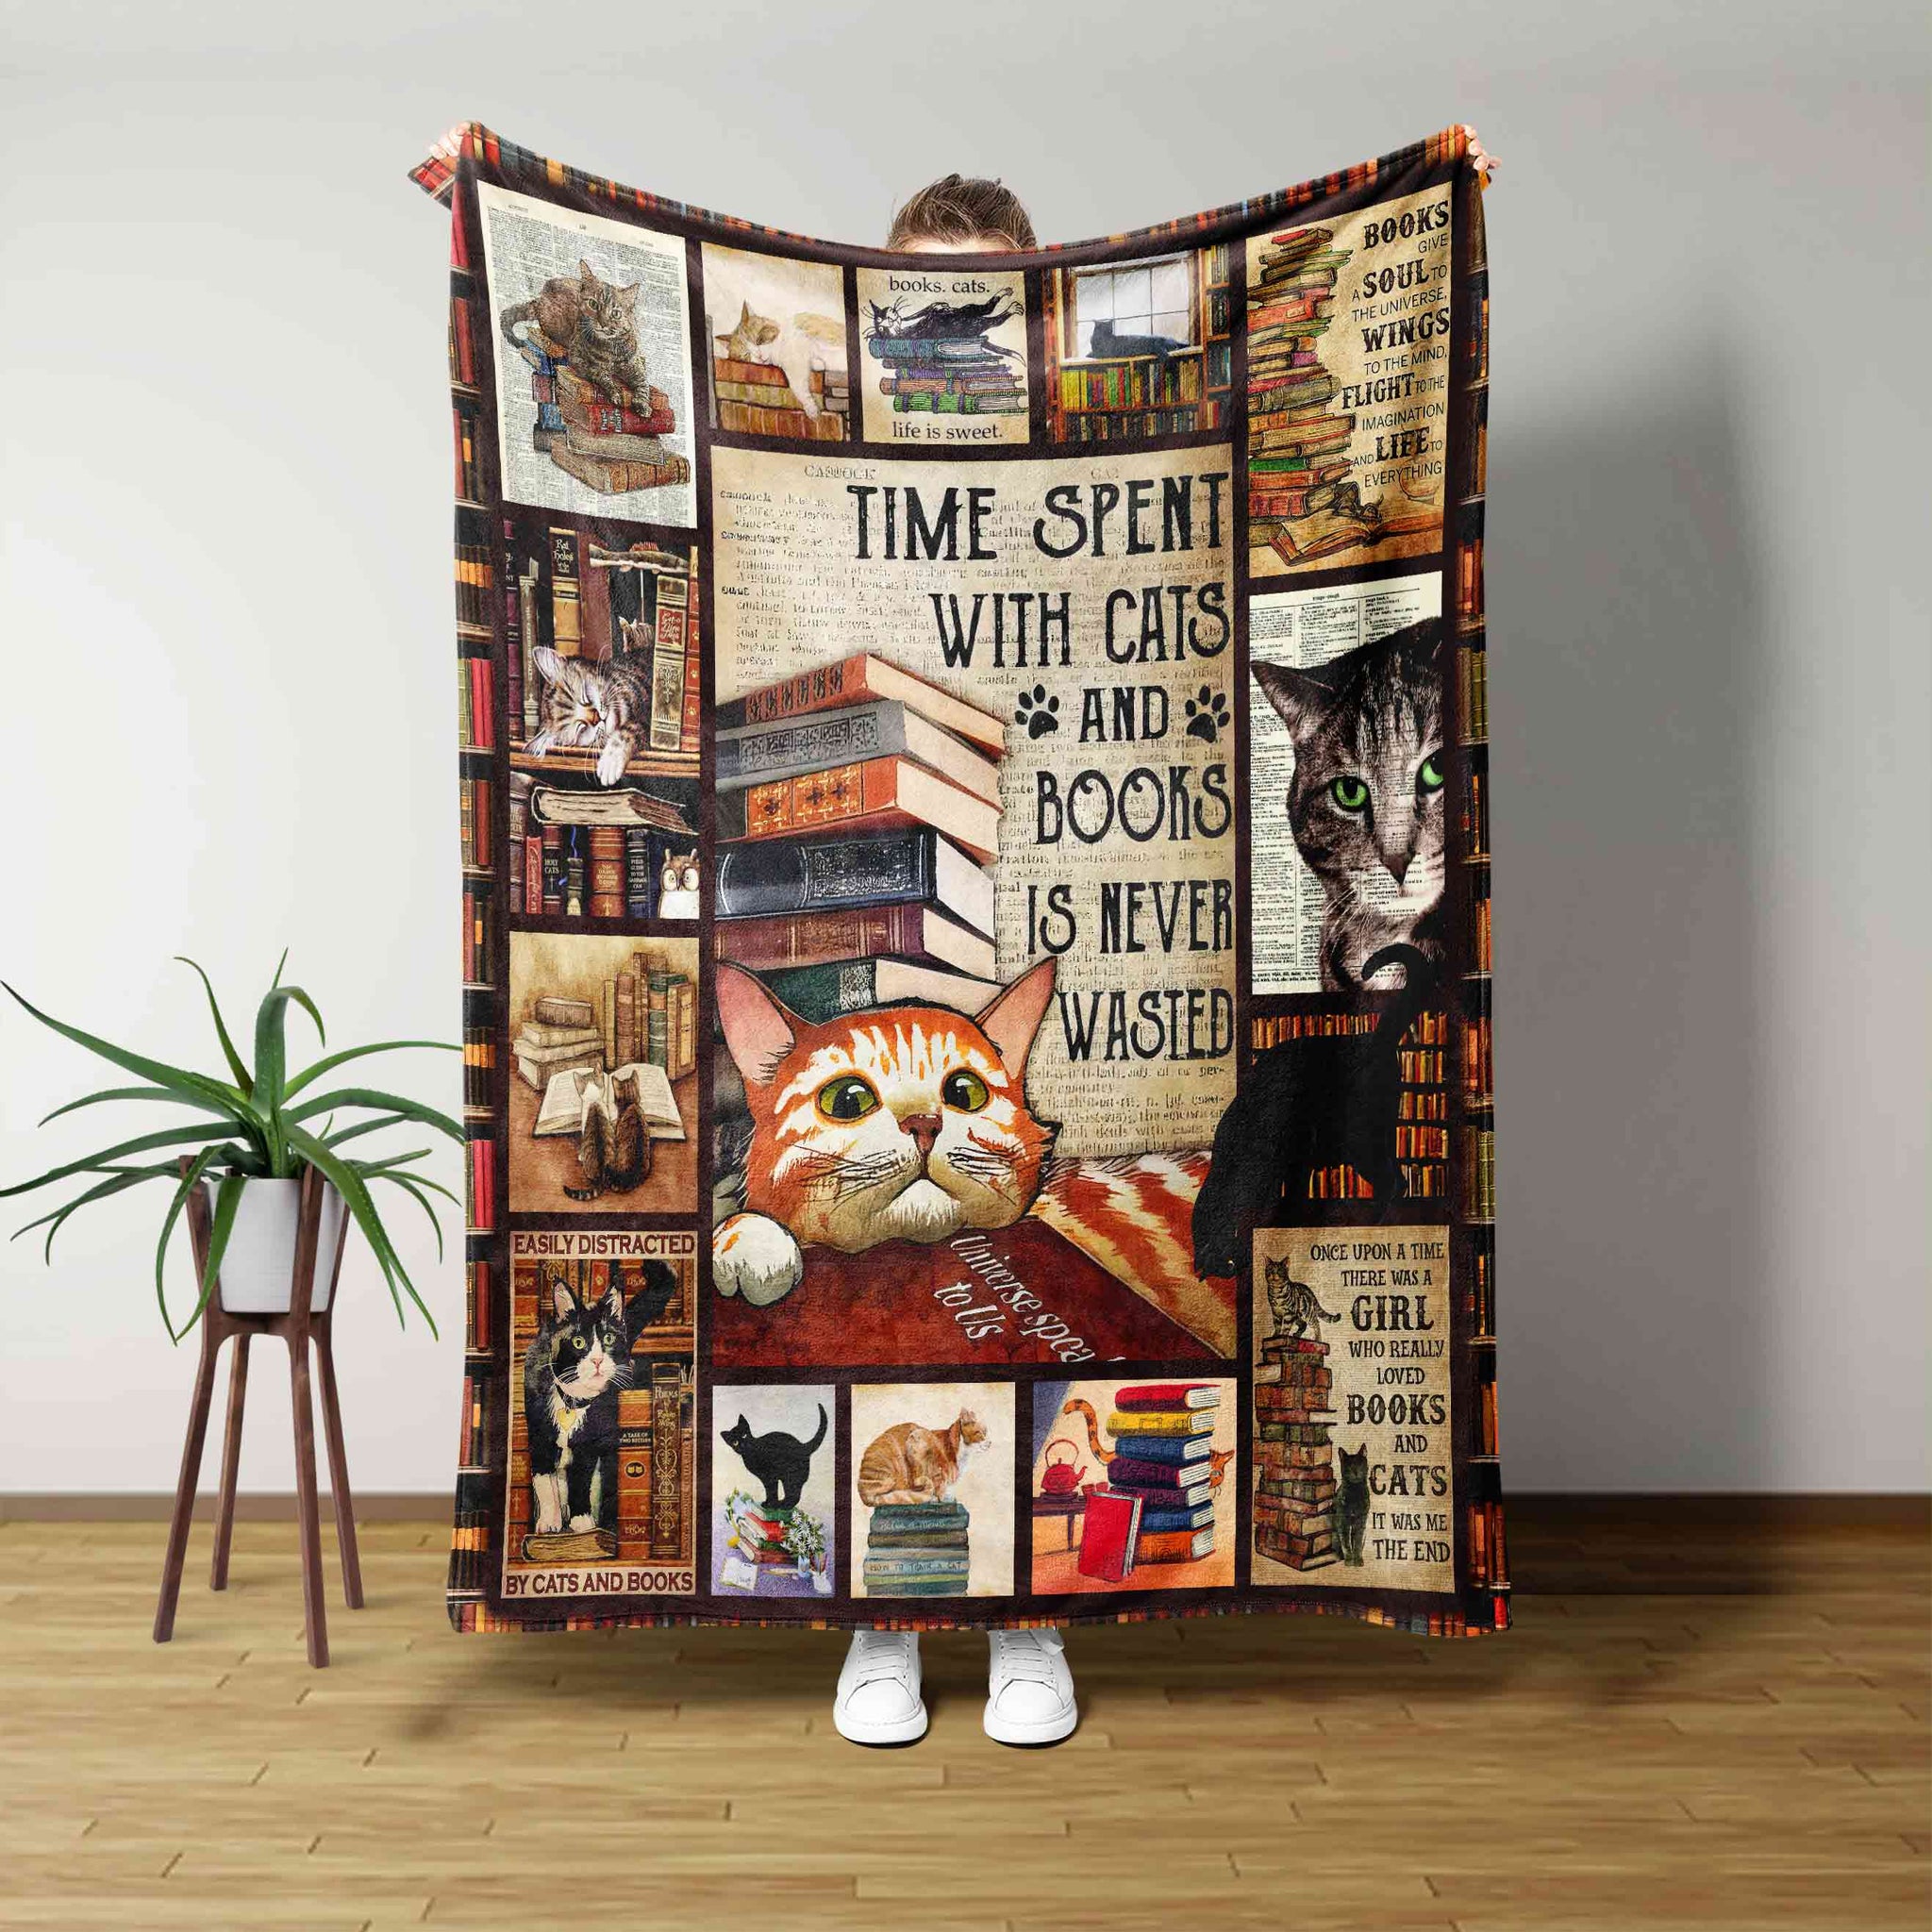 Time Spent With Cats And Books Is Never Wasted Blanket, Cat Blanket, Book Blanket, Family Blanket, Blanket For Gift